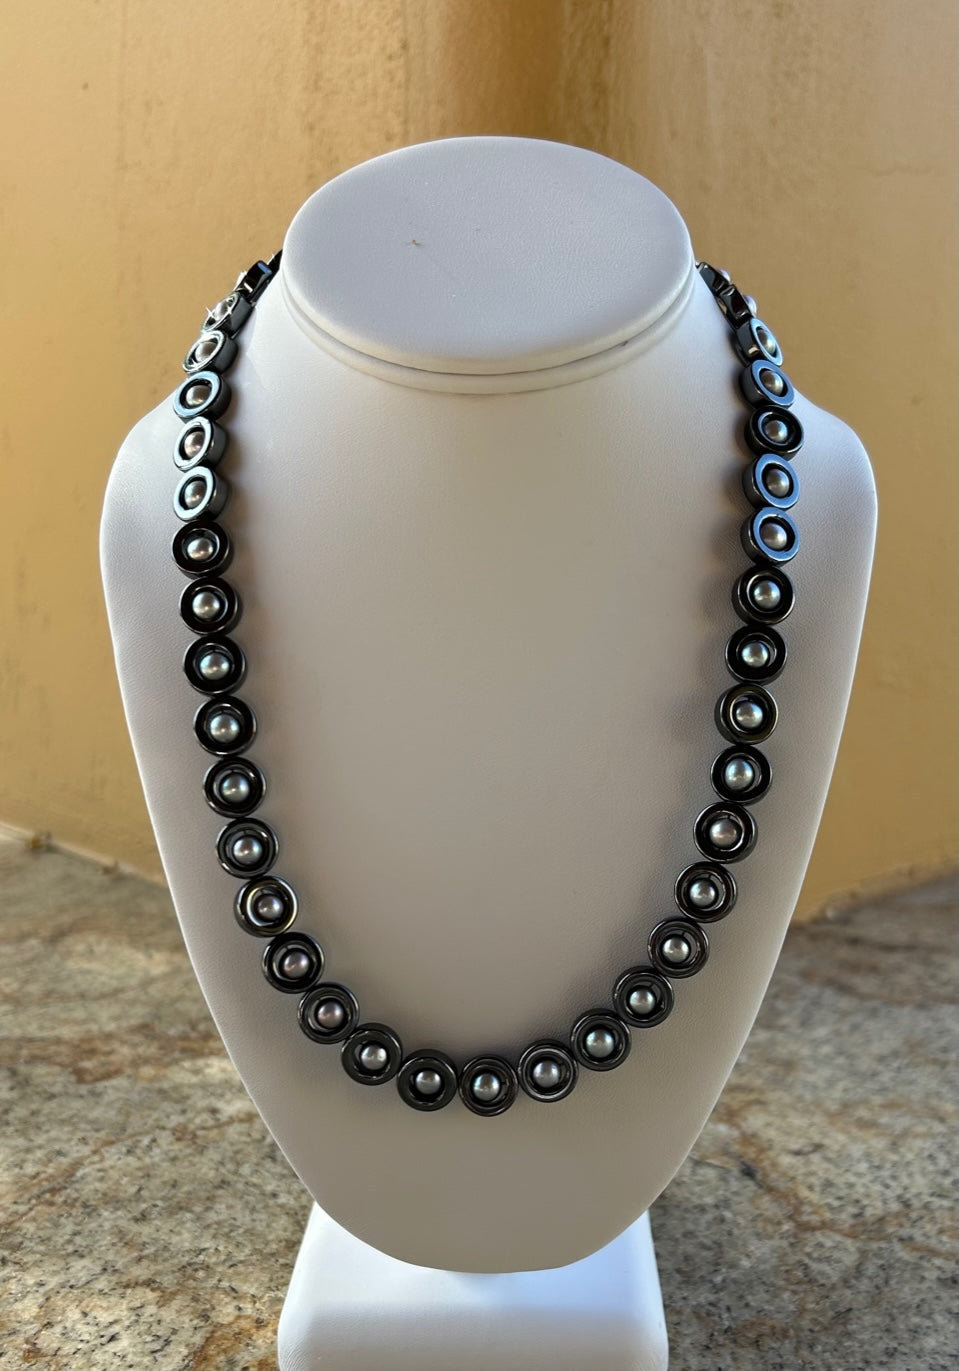 Necklace - Grey fresh water pearls surrounded by hematite